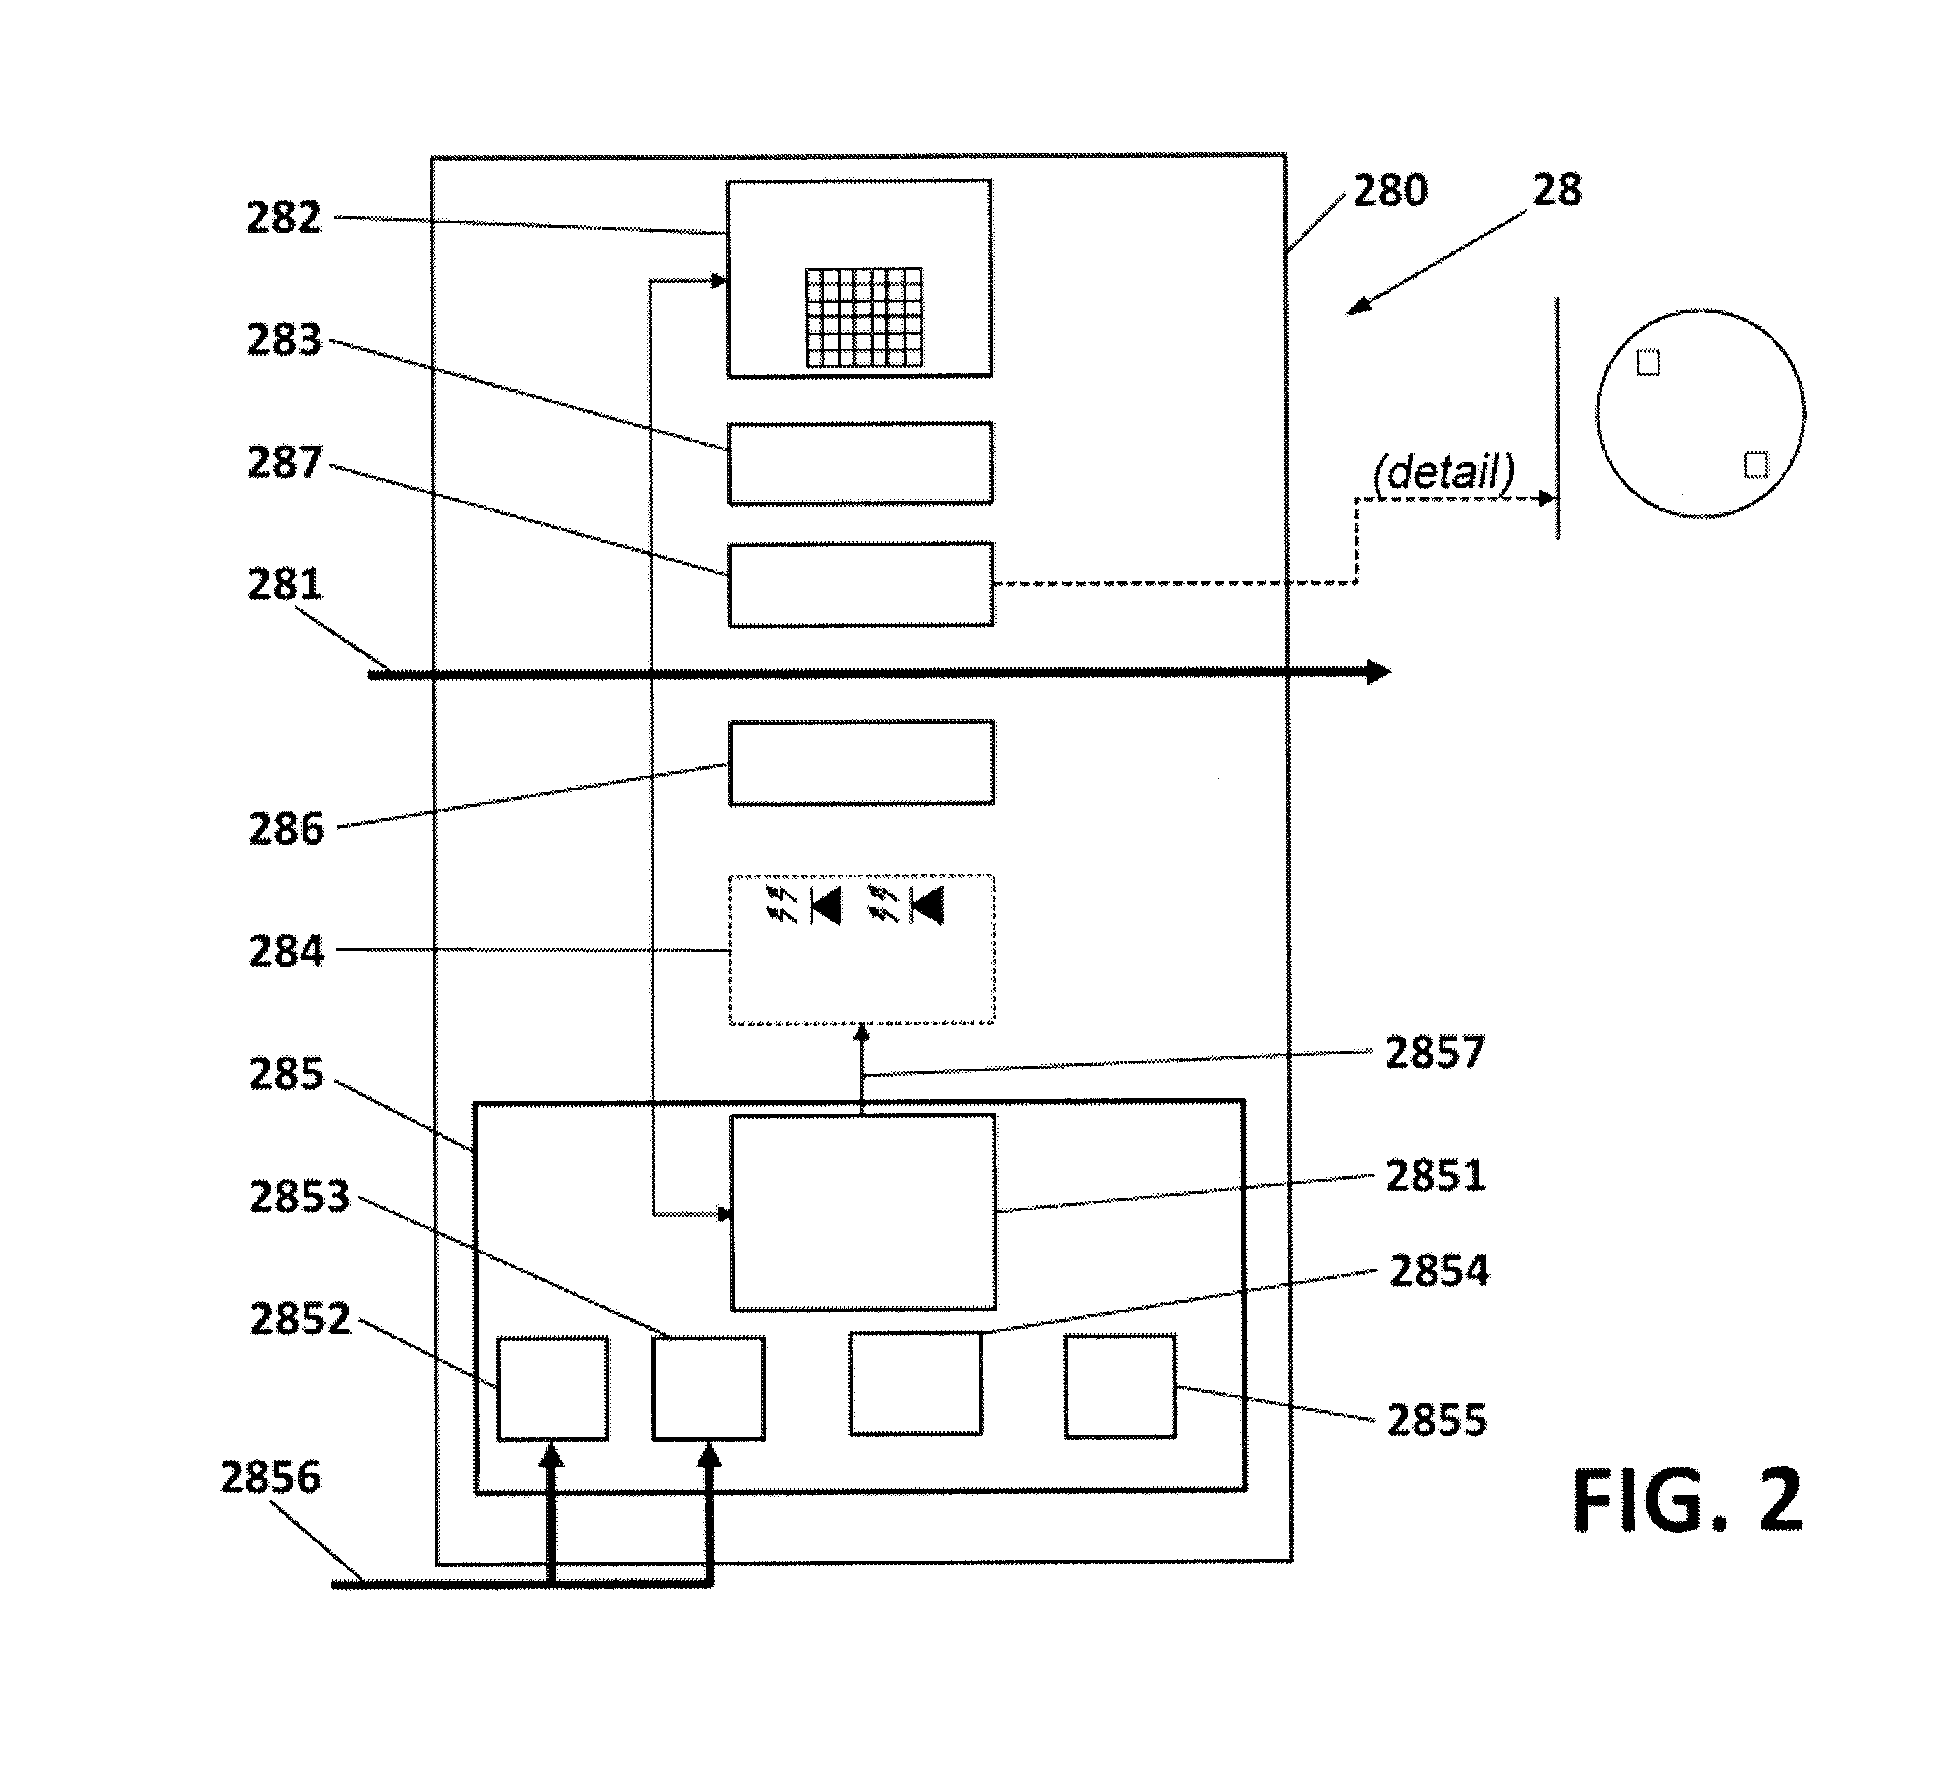 System and method for monitoring a fluid